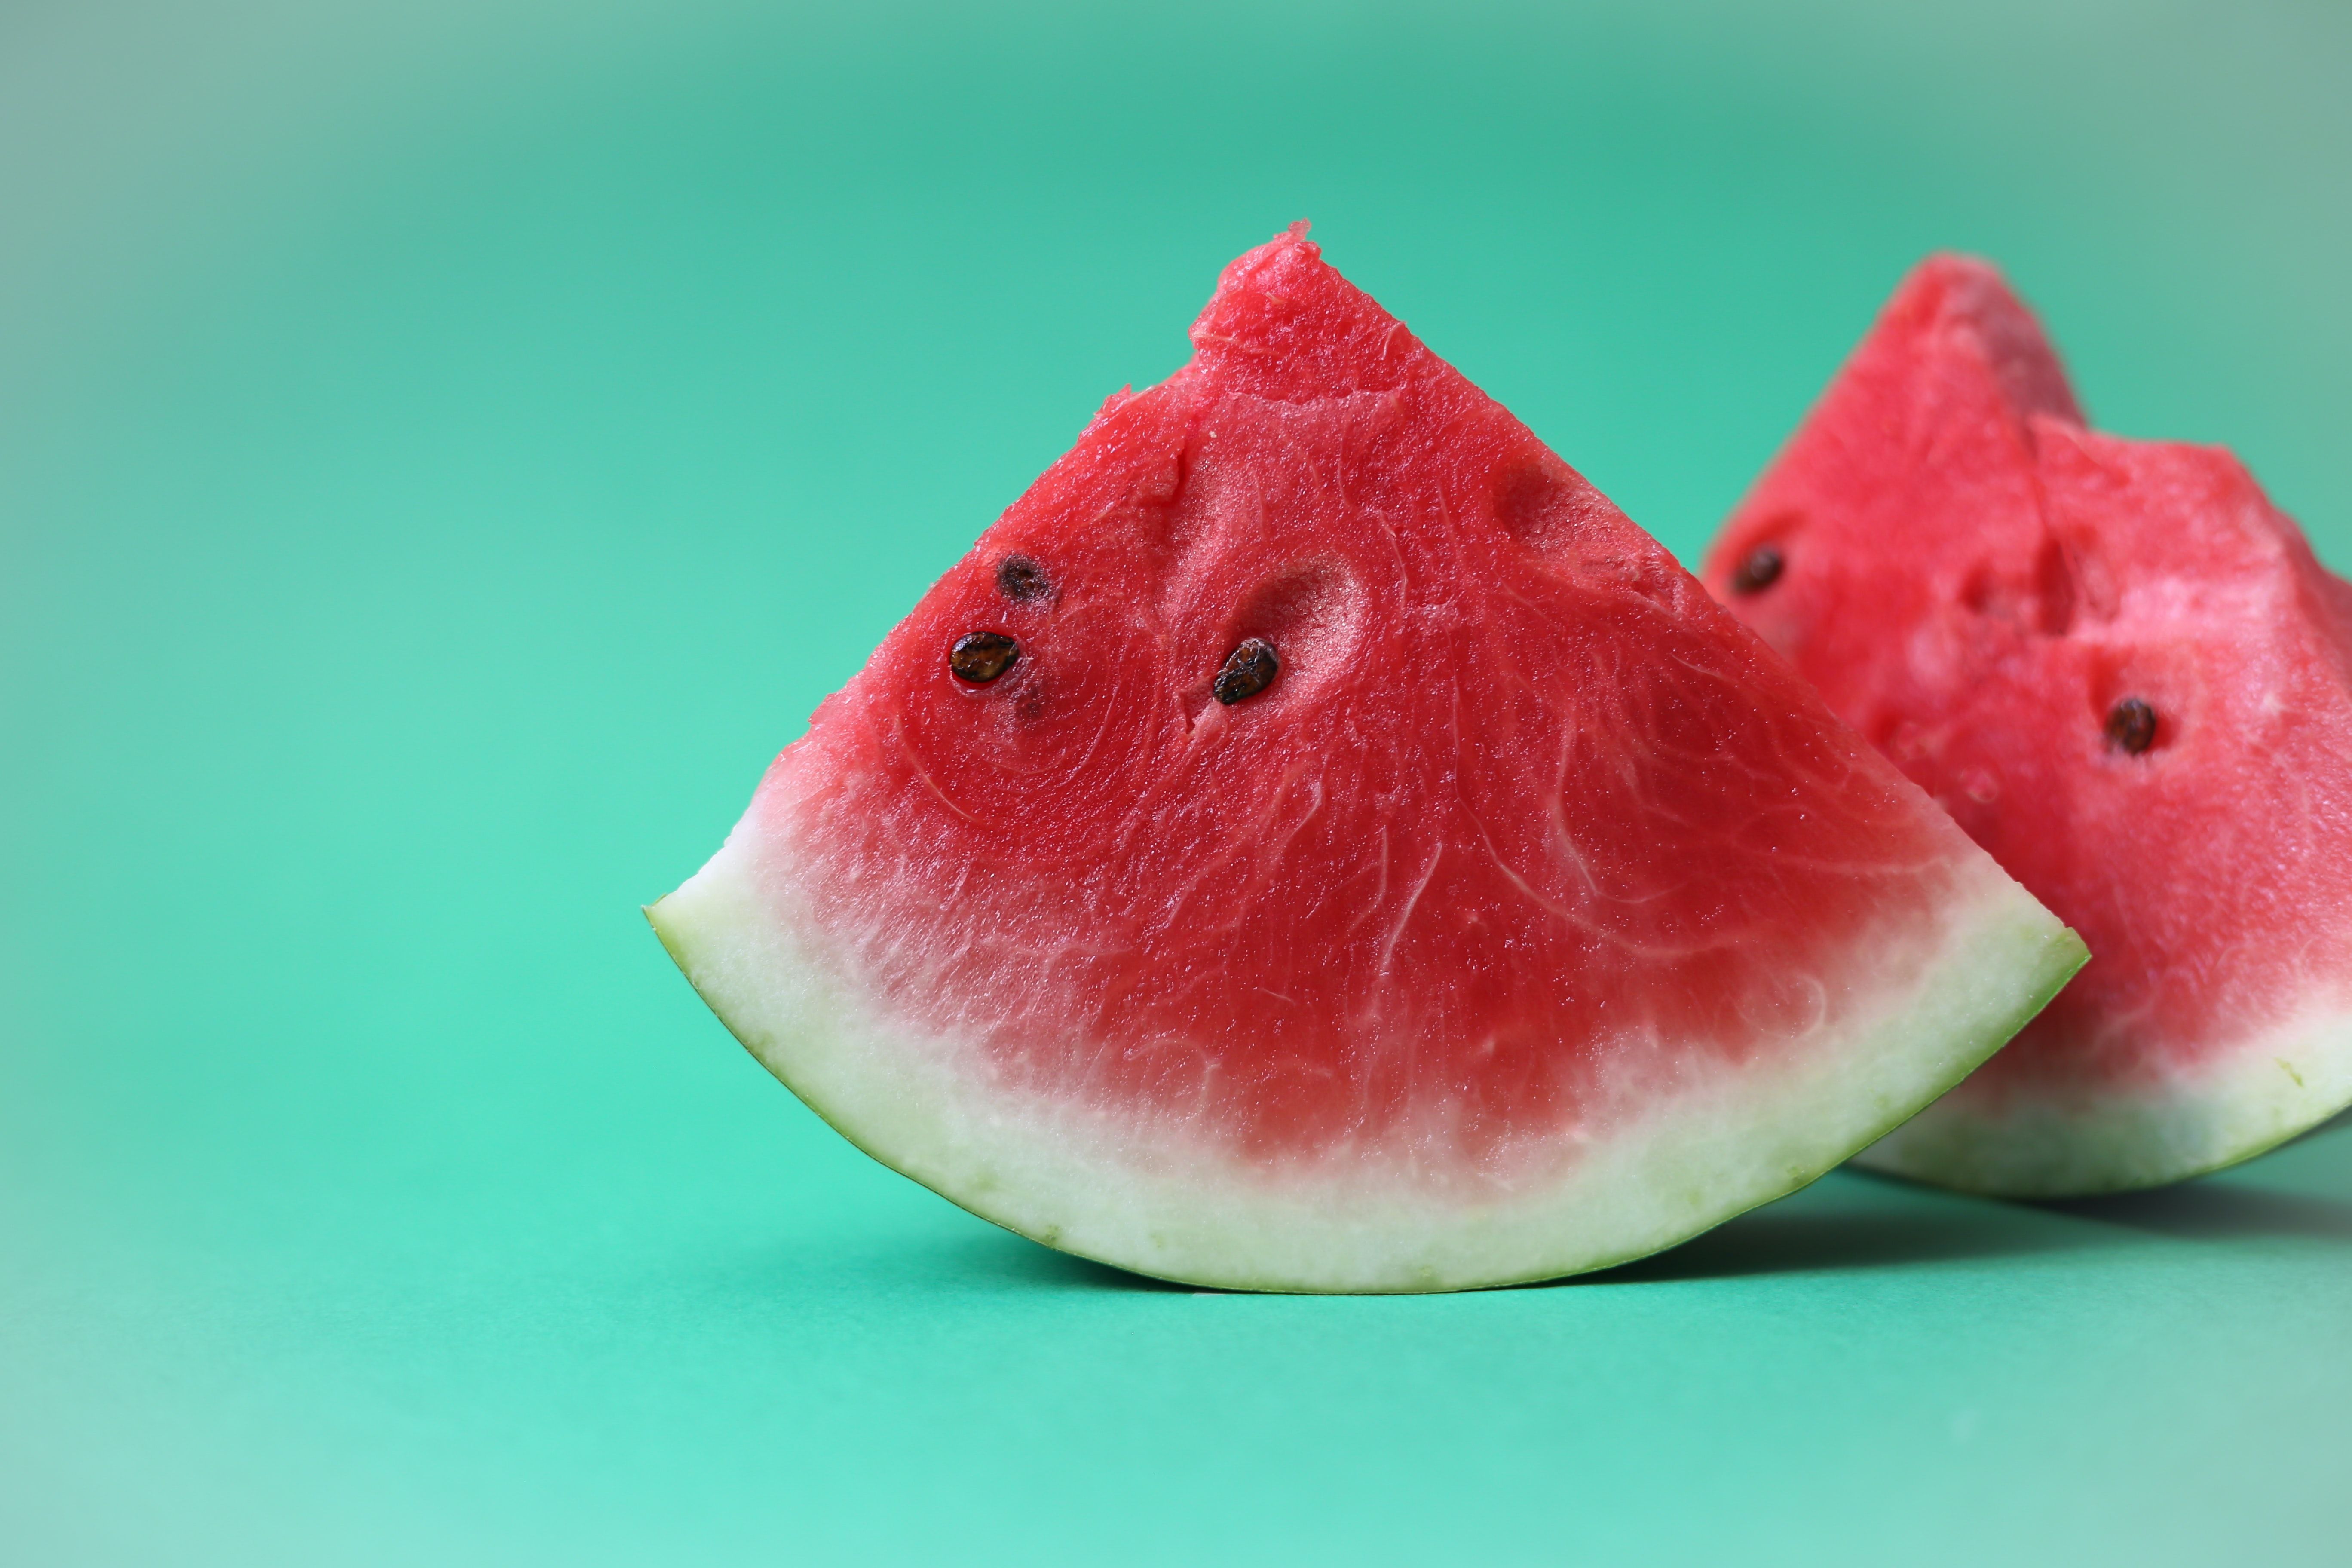 Are watermelon seeds healthy?